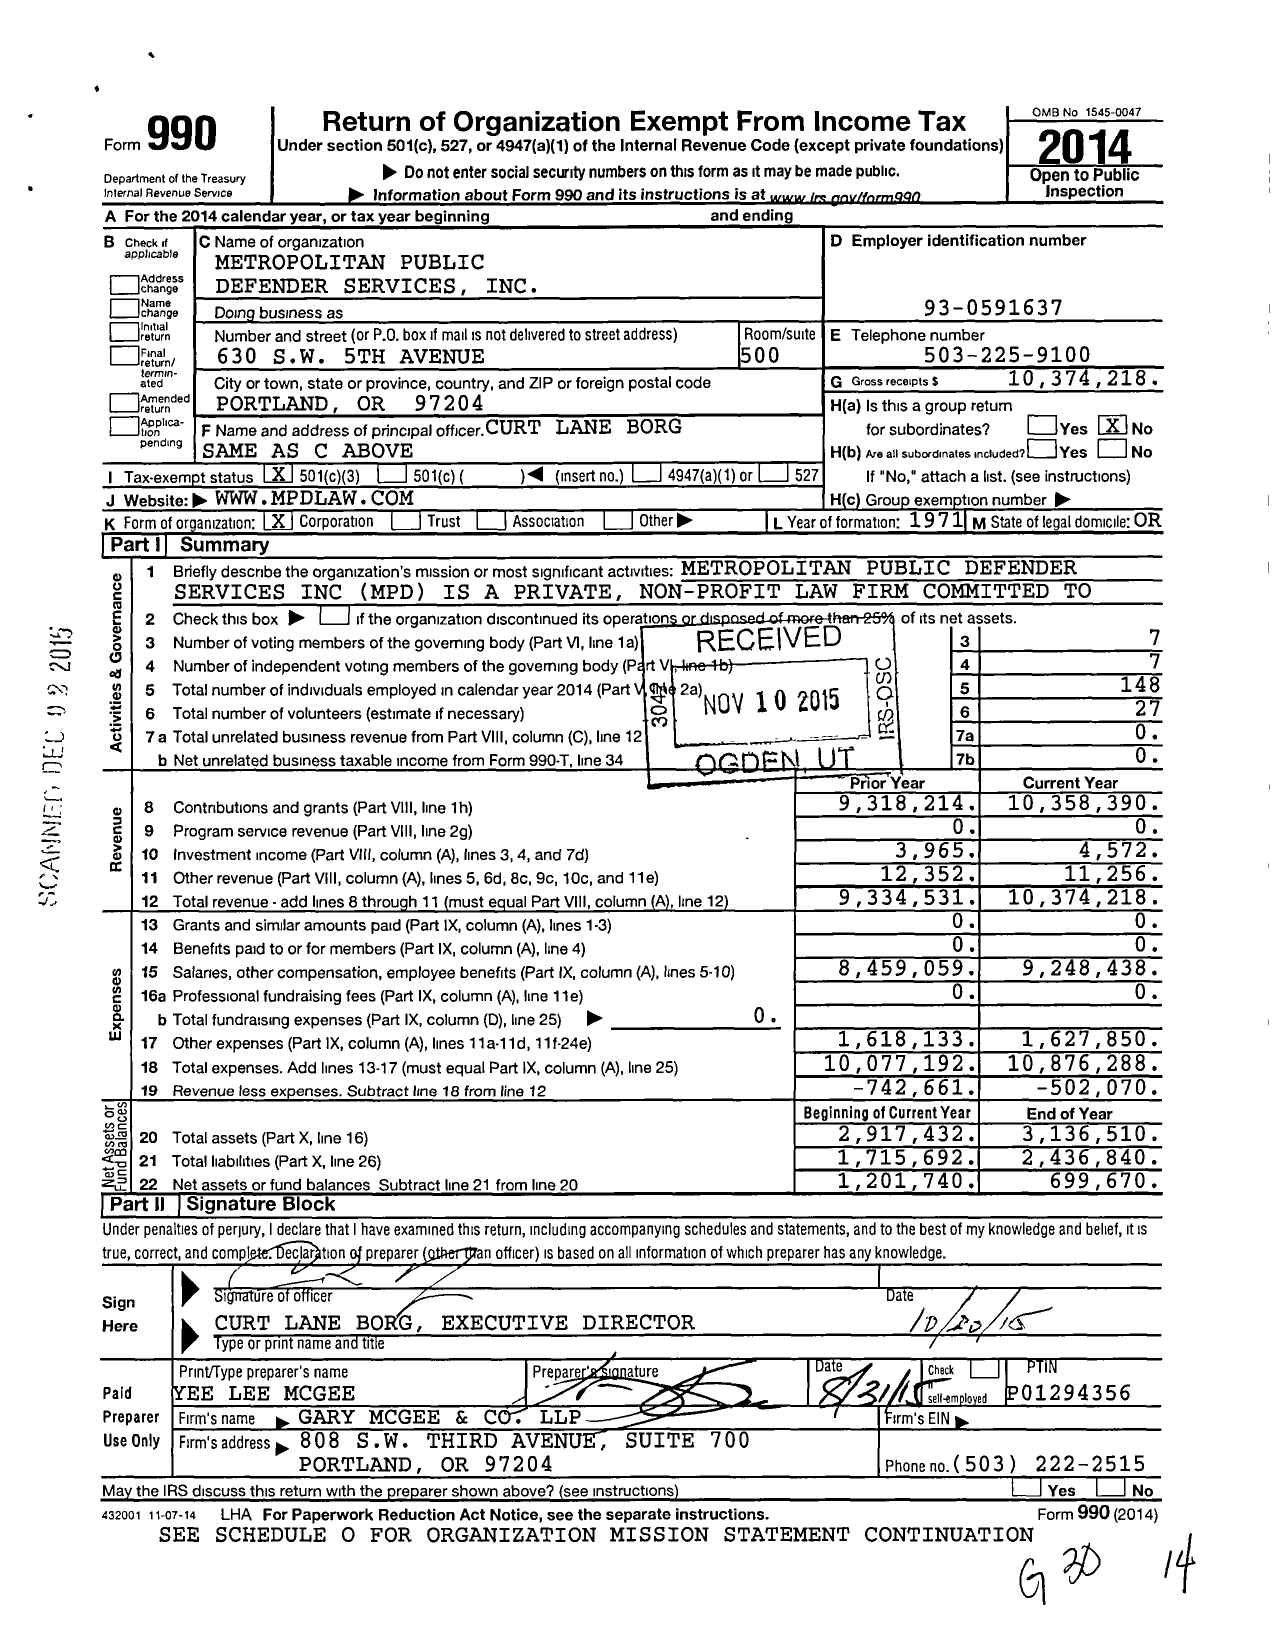 Image of first page of 2014 Form 990 for Metropolitan Public Defender Services